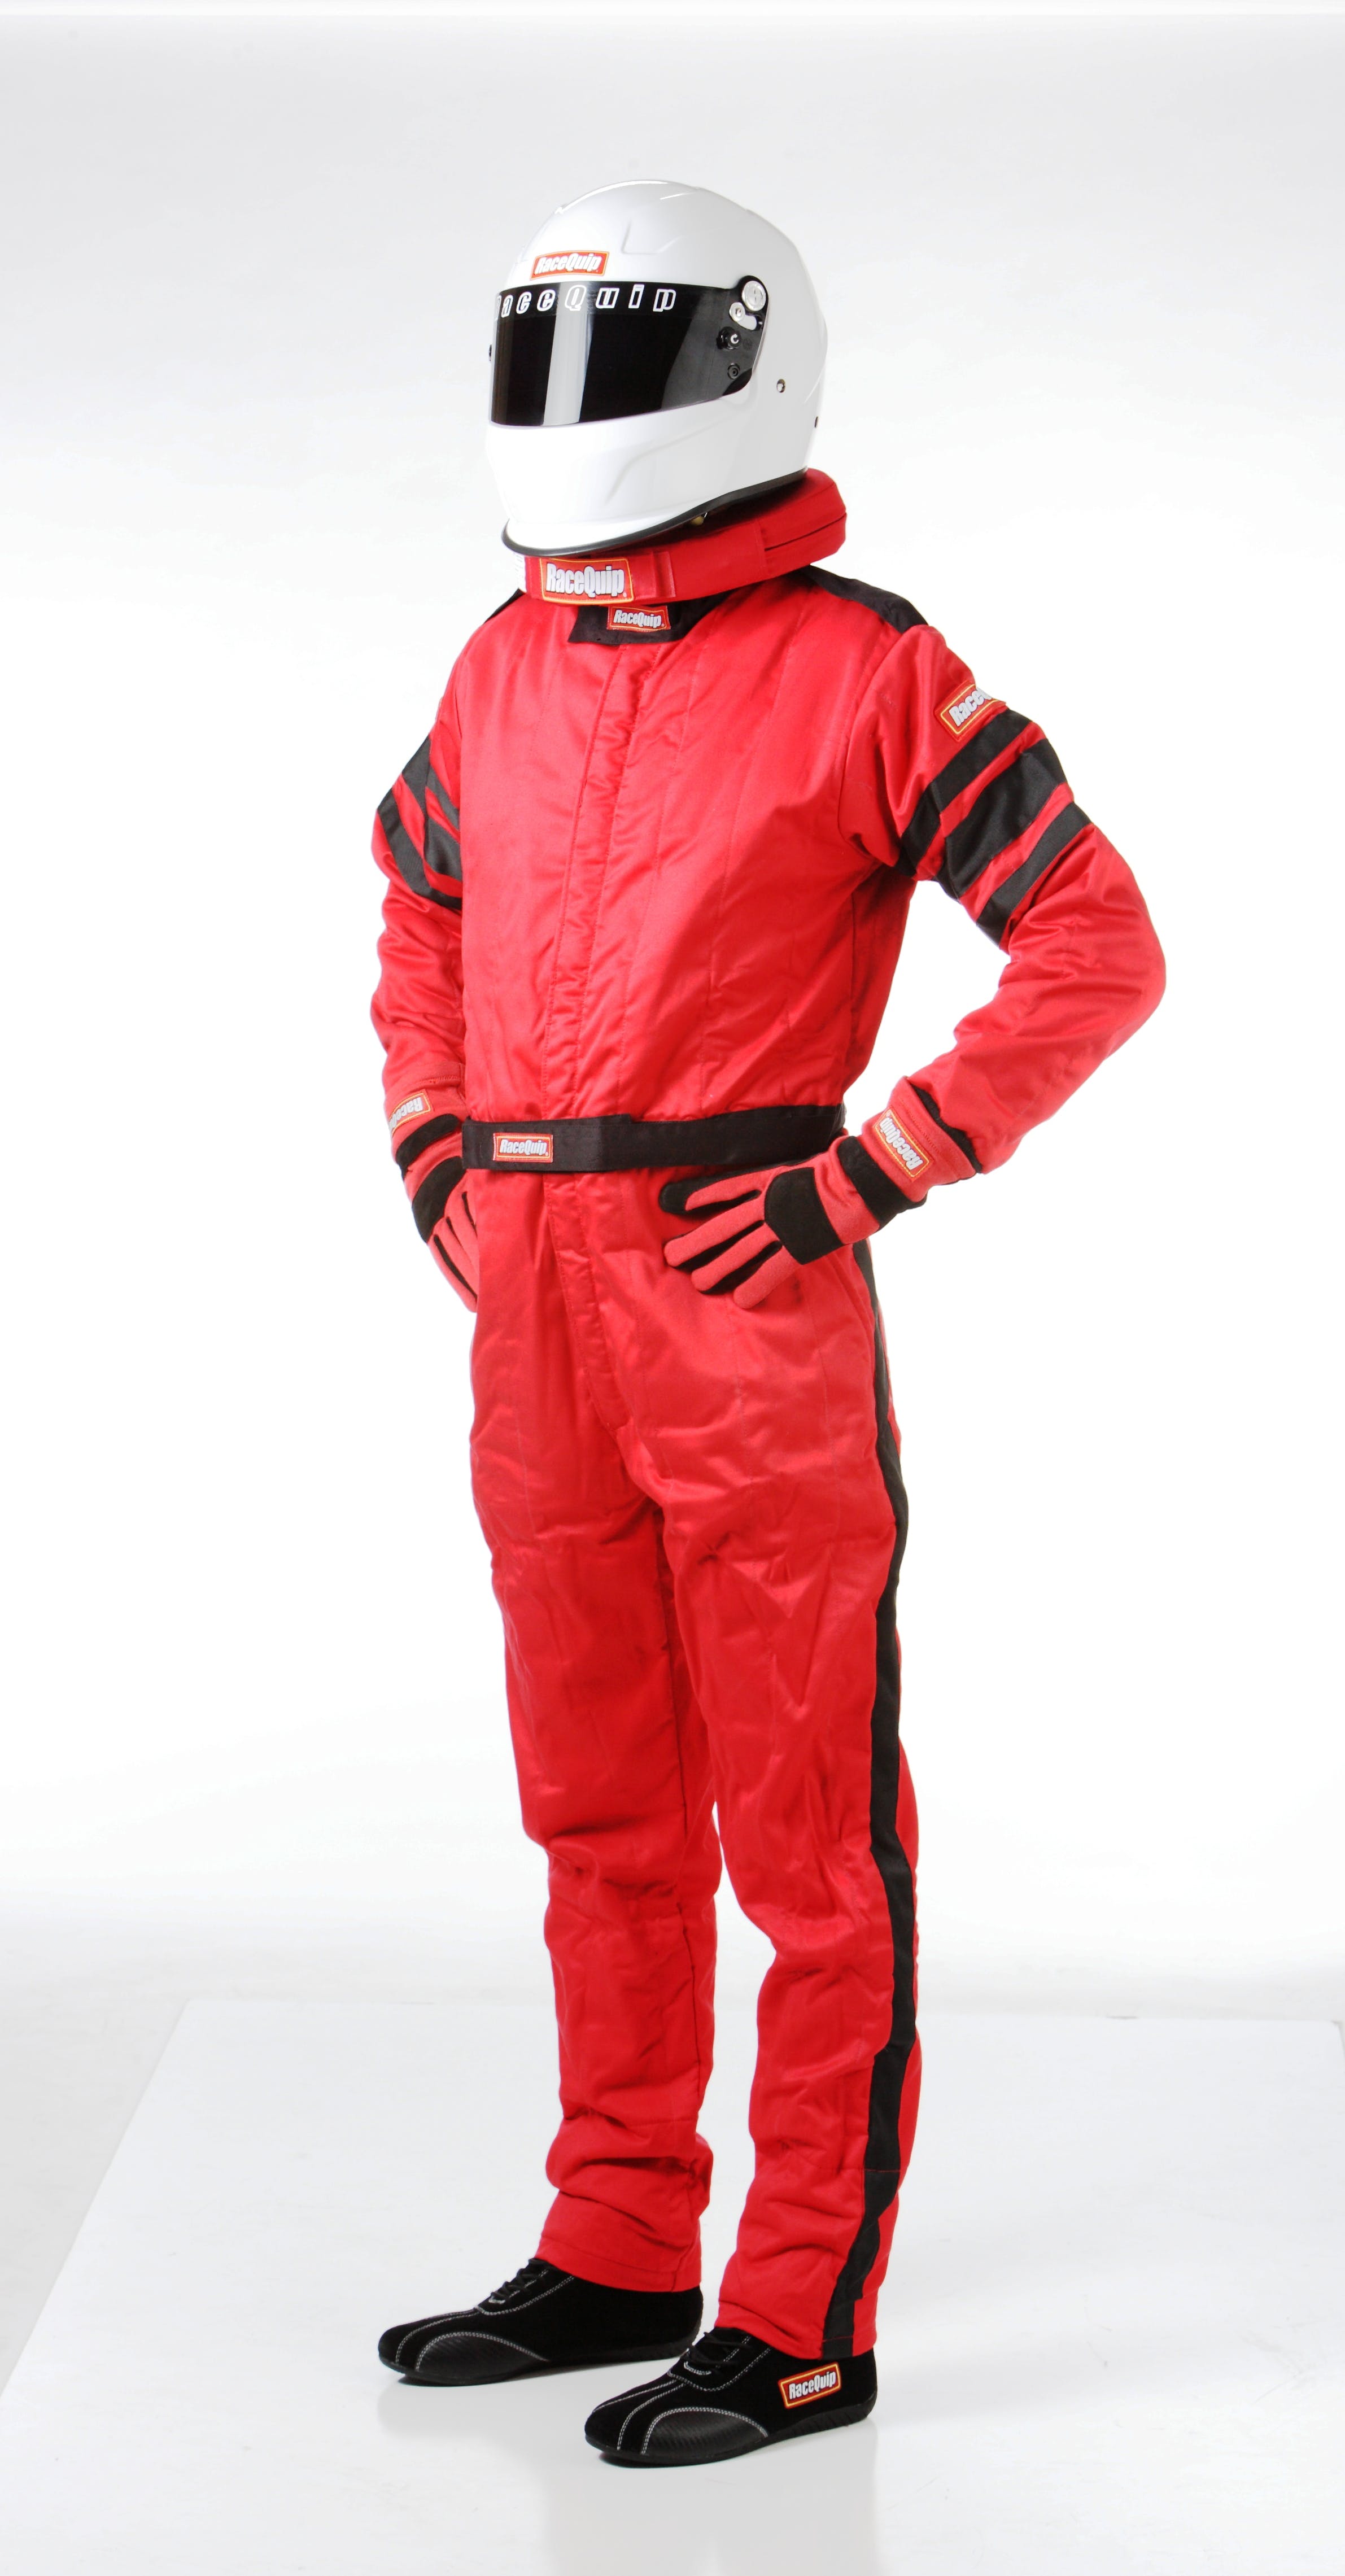 RaceQuip 120015 SFI-5 Pyrovatex One-Piece Multi-Layer Racing Fire Suit (Red, Large)